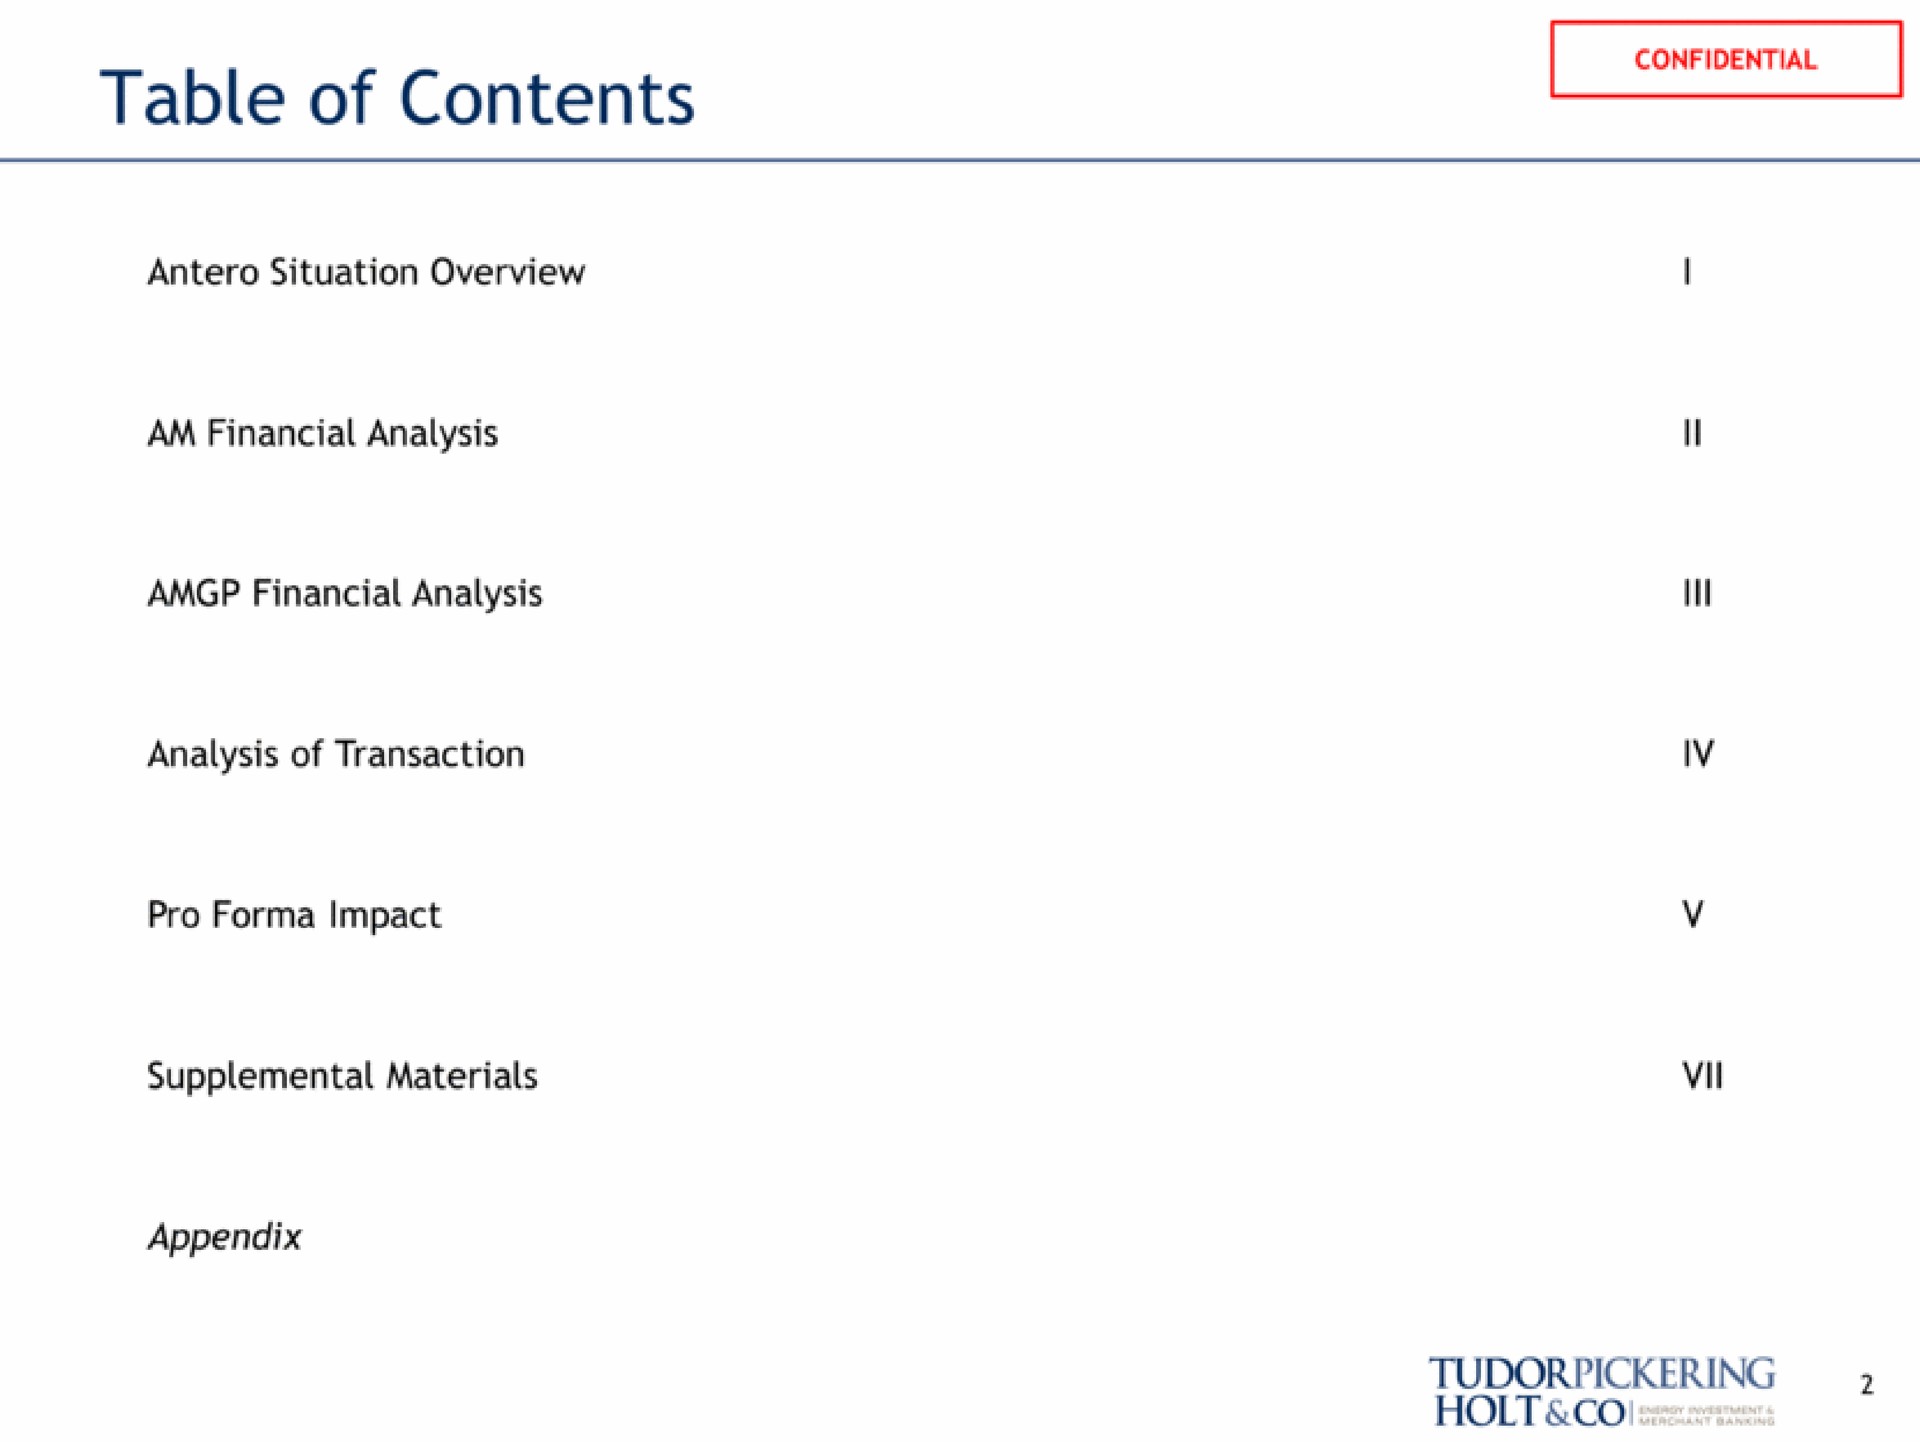 table of contents am financial analysis analysis of transaction supplemental materials holt | Tudor, Pickering, Holt & Co